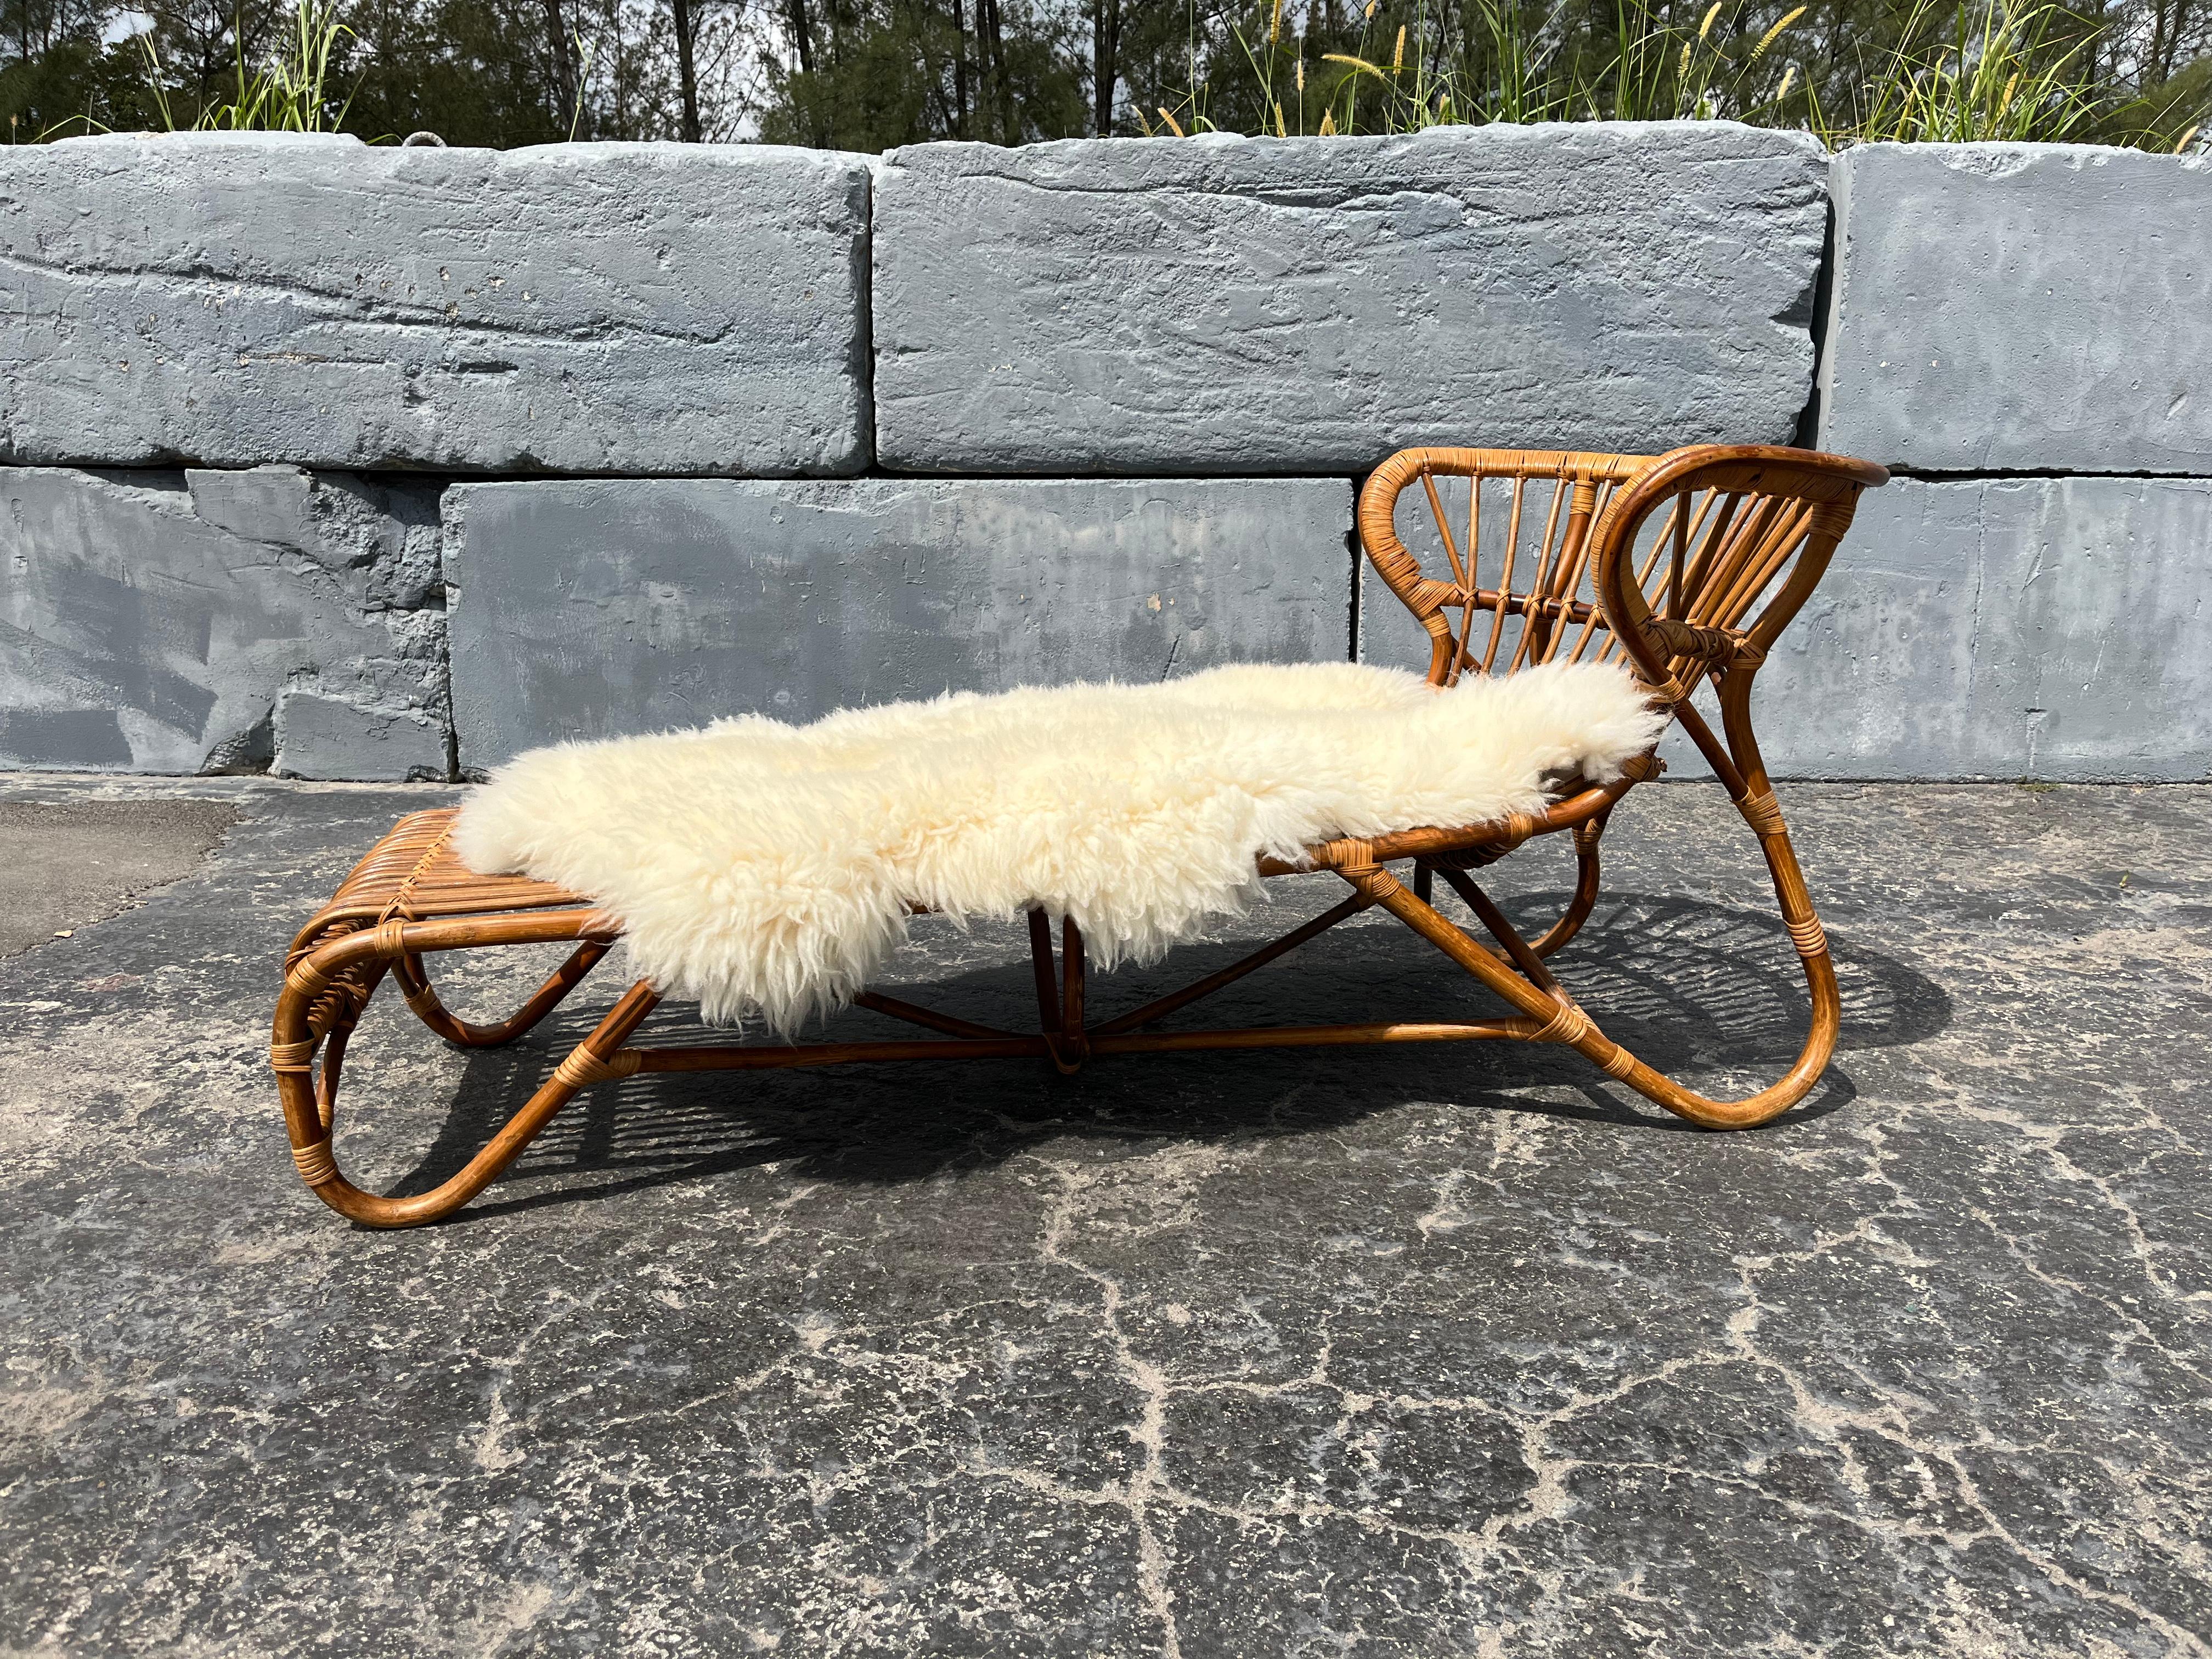 1970s Bamboo Chaise Lounge Attributed to Viggo Boesen.
Bamboo with cane wrap. Ready for a new home. 
Sheepskin is included, sheepskin has some natural oder.